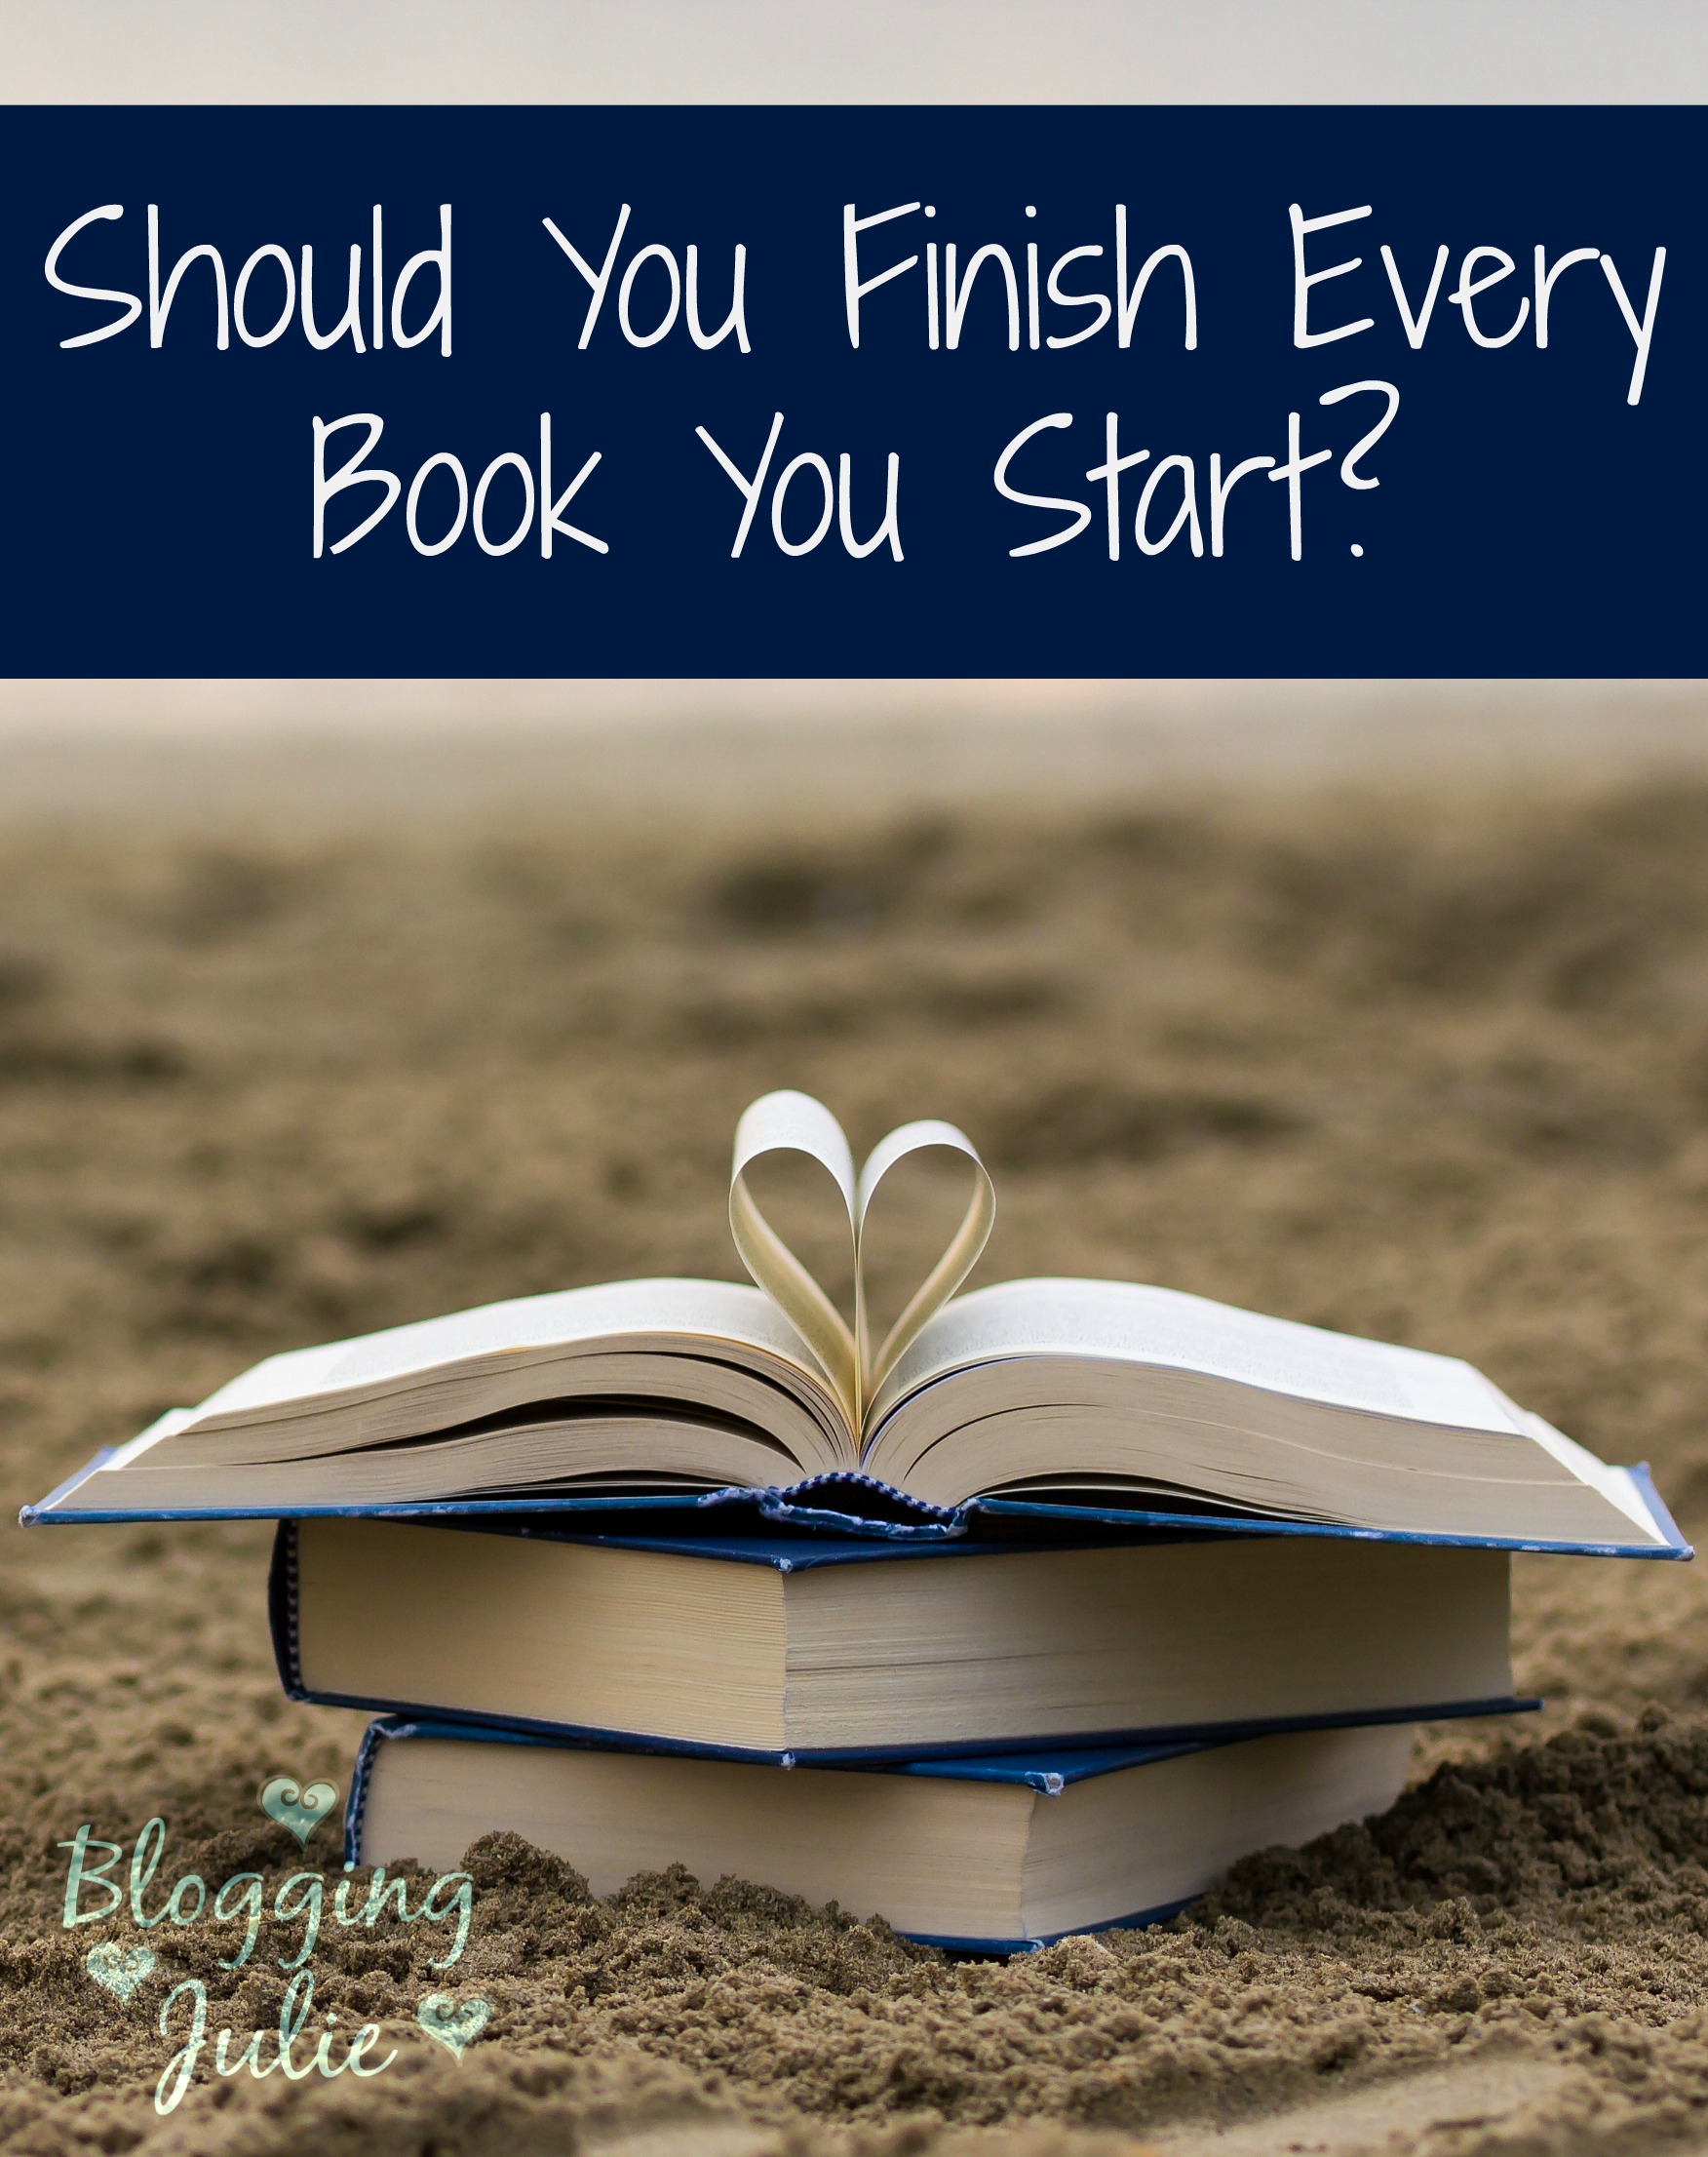 Should You Finish Every Book You Start?